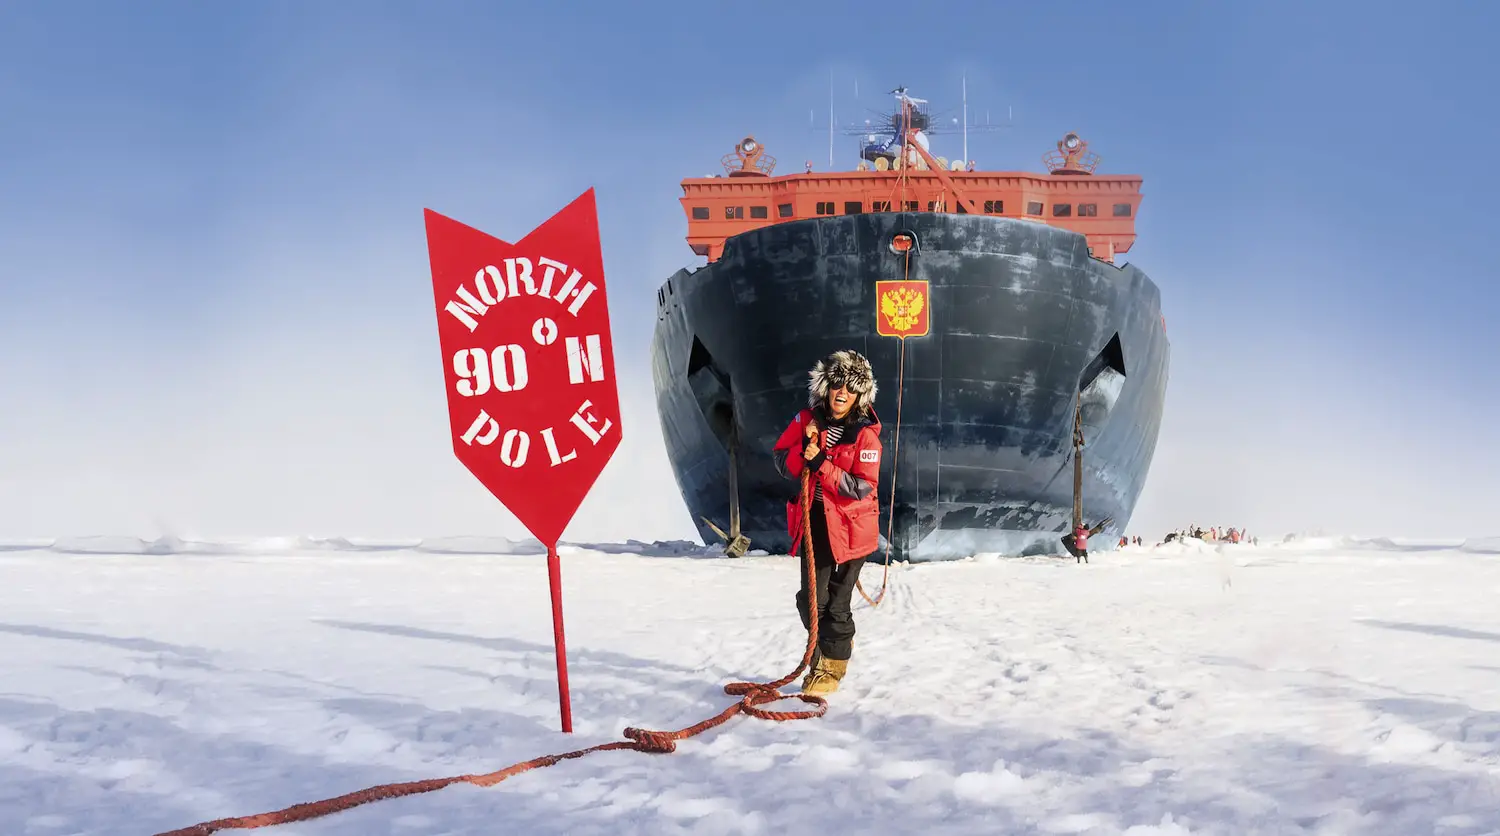 north pole expedition cruise